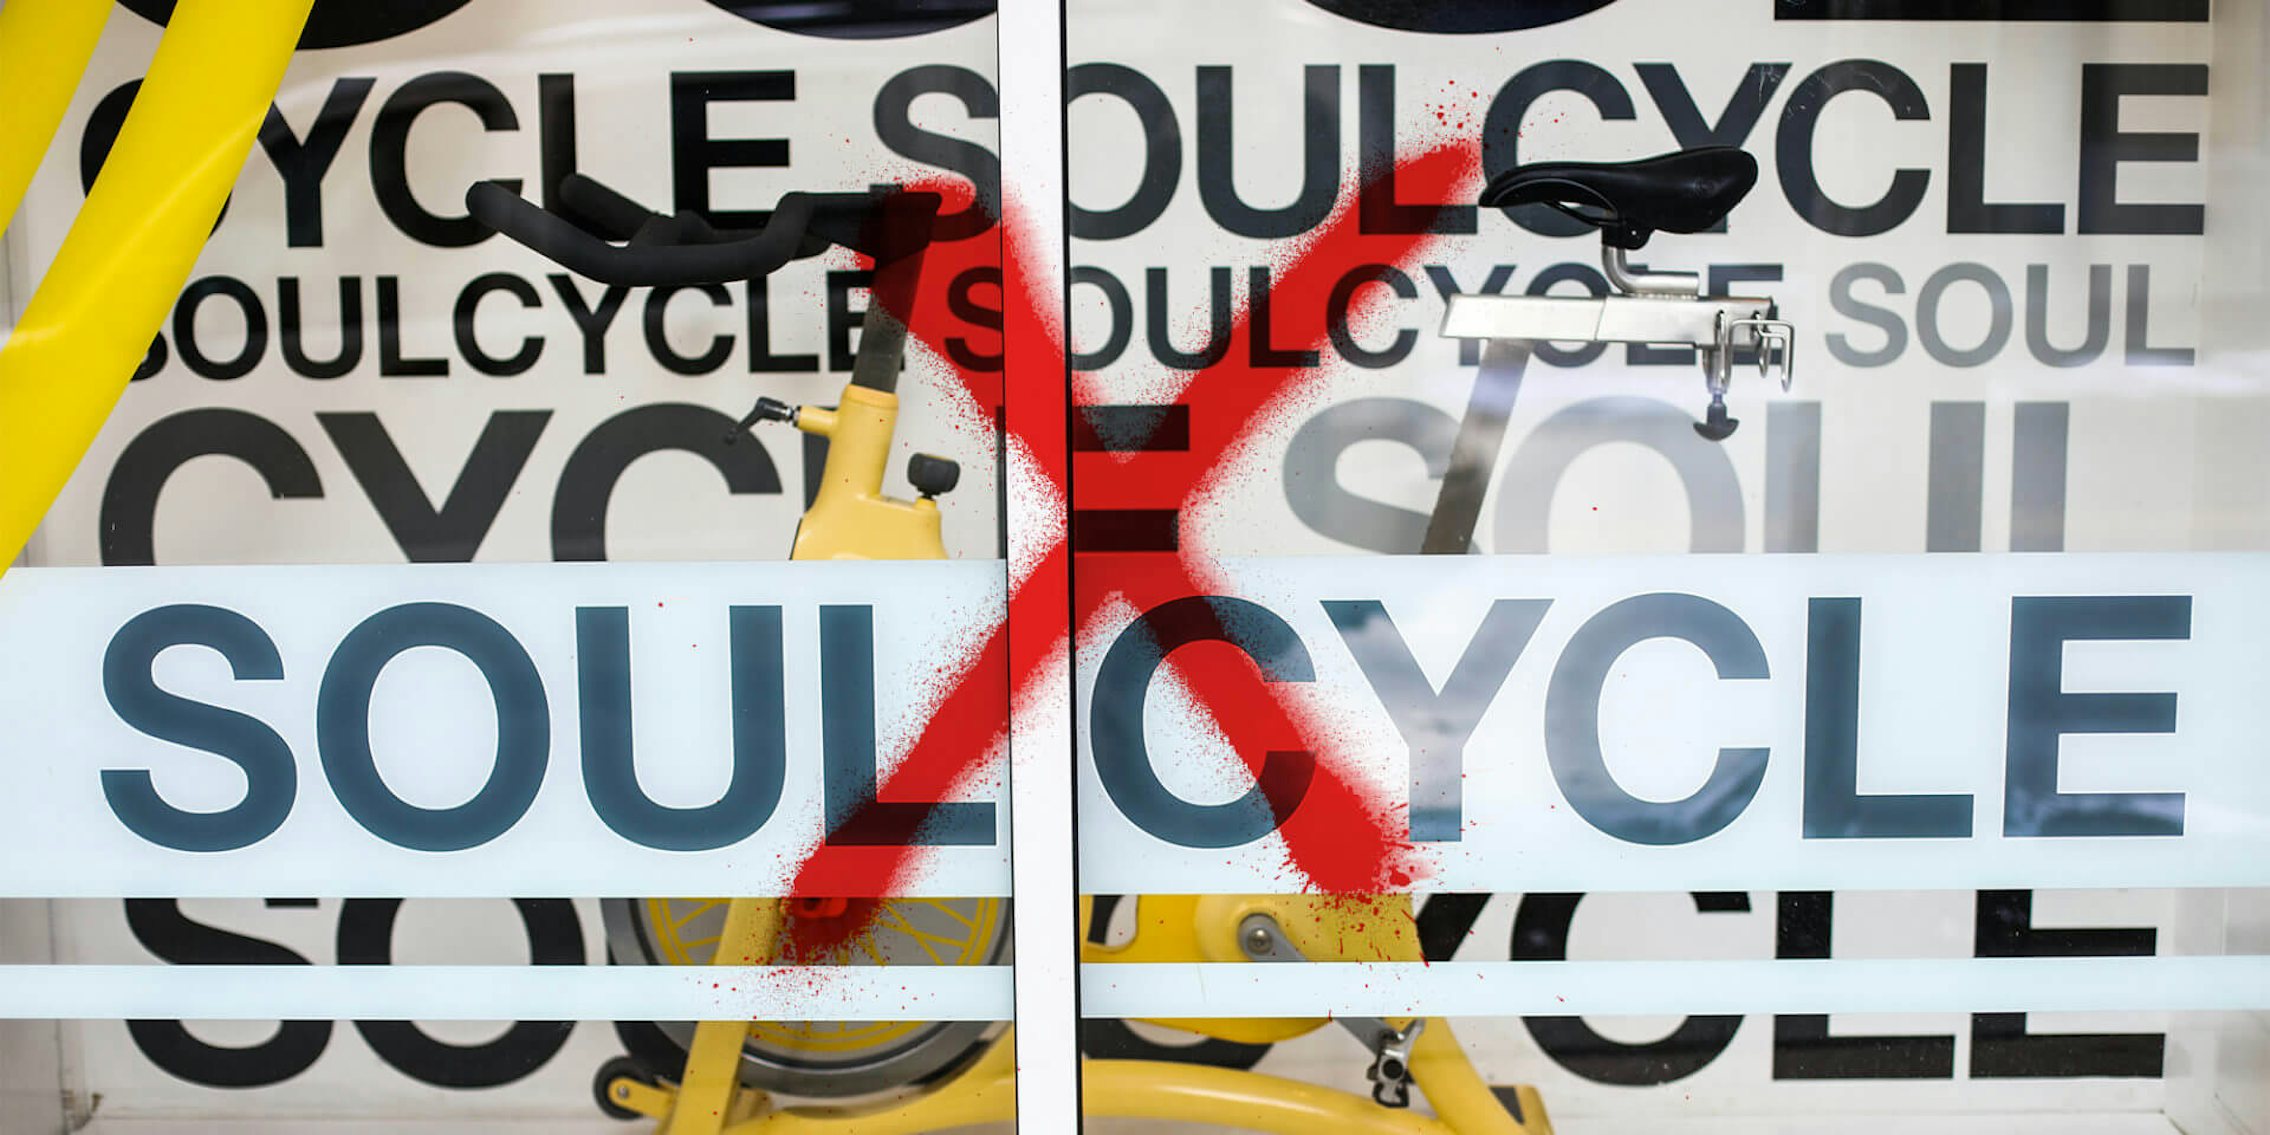 soulcycle store window spray painted with a red X